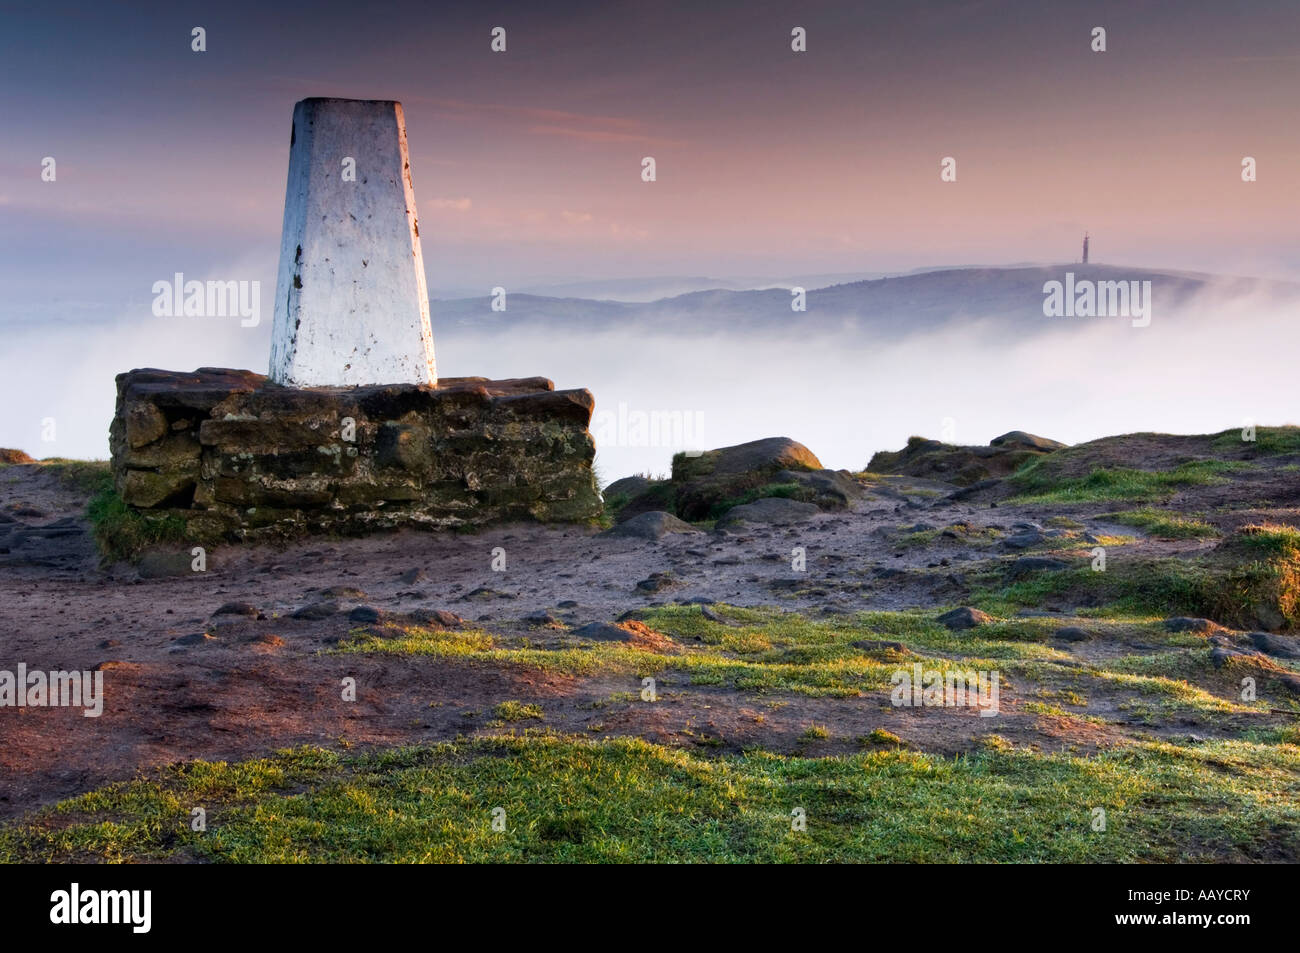 Early Morning Mist Shrouds the Trig Point on Bosley Cloud, Near Congleton, Cheshire and Staffordshire Border, England, UK Stock Photo